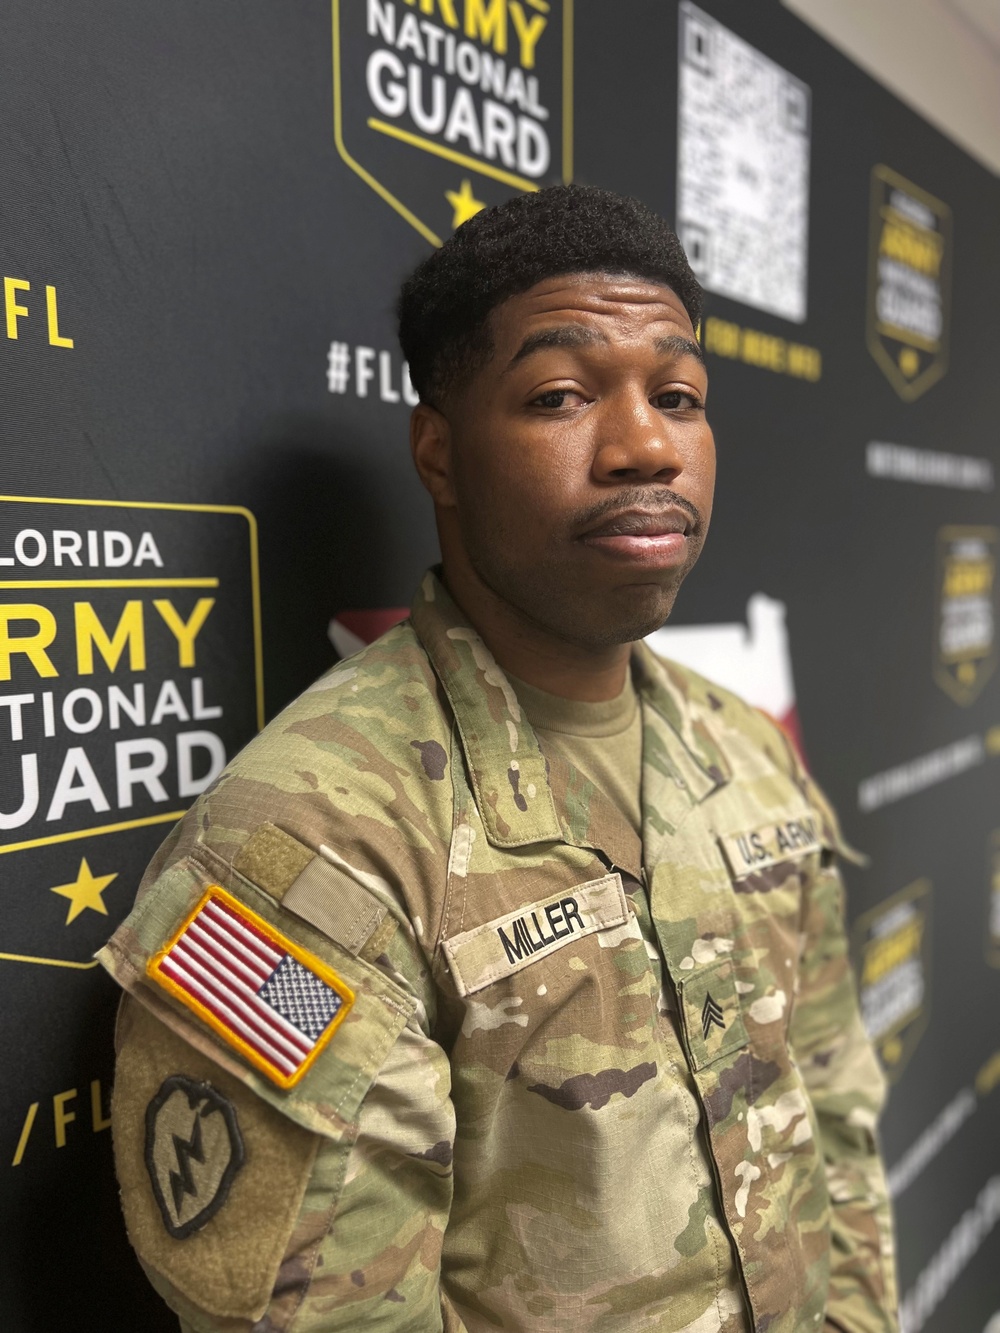 Jacksonville native named top recruiter of the month, attributes success to hometown pride